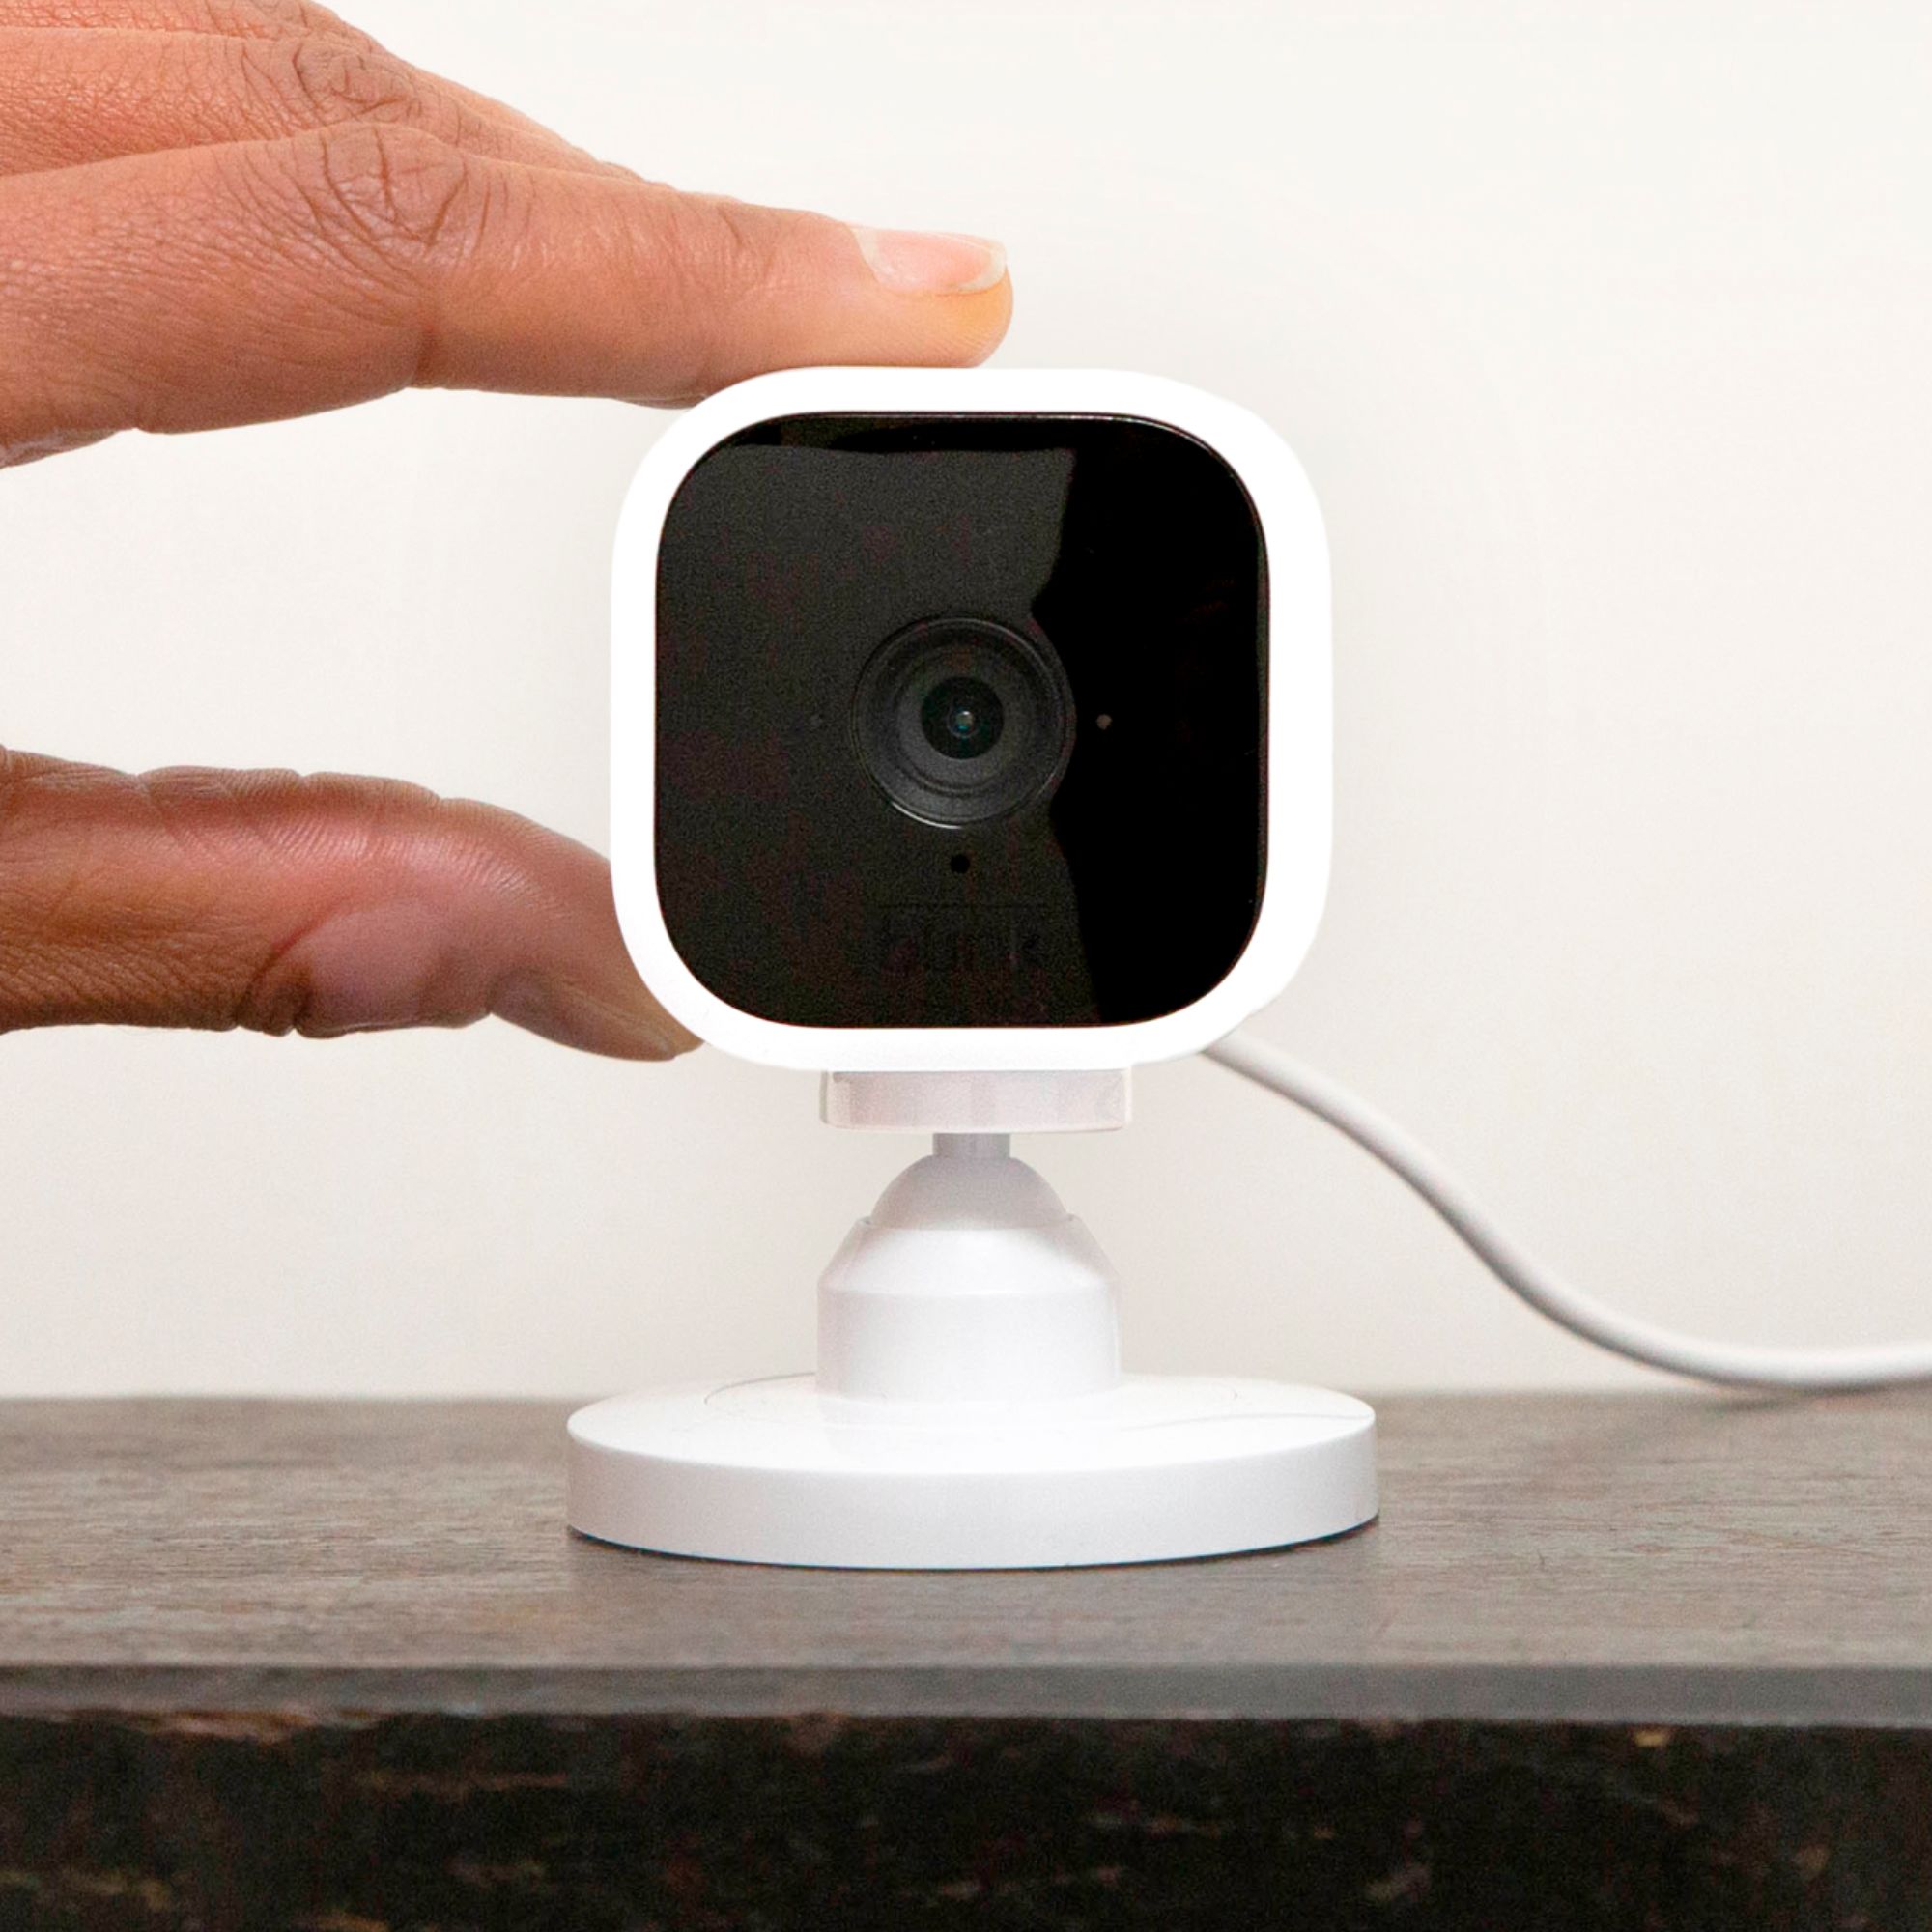 Keep an eye on your home from anywhere with up to 39% off Blink security  cameras - CNET